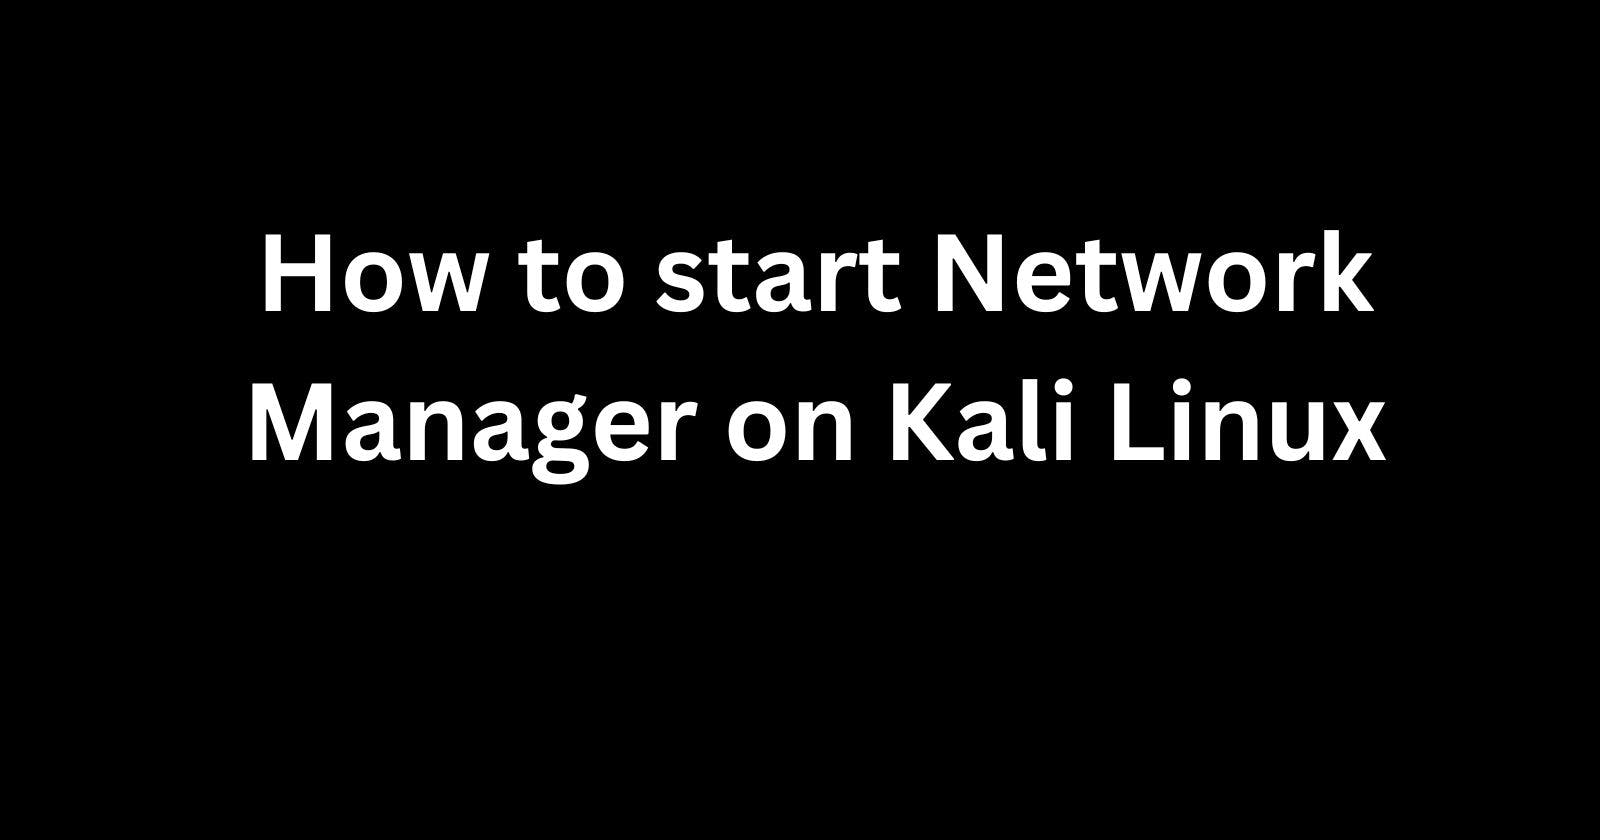 Getting Started with NetworkManager on Kali Linux